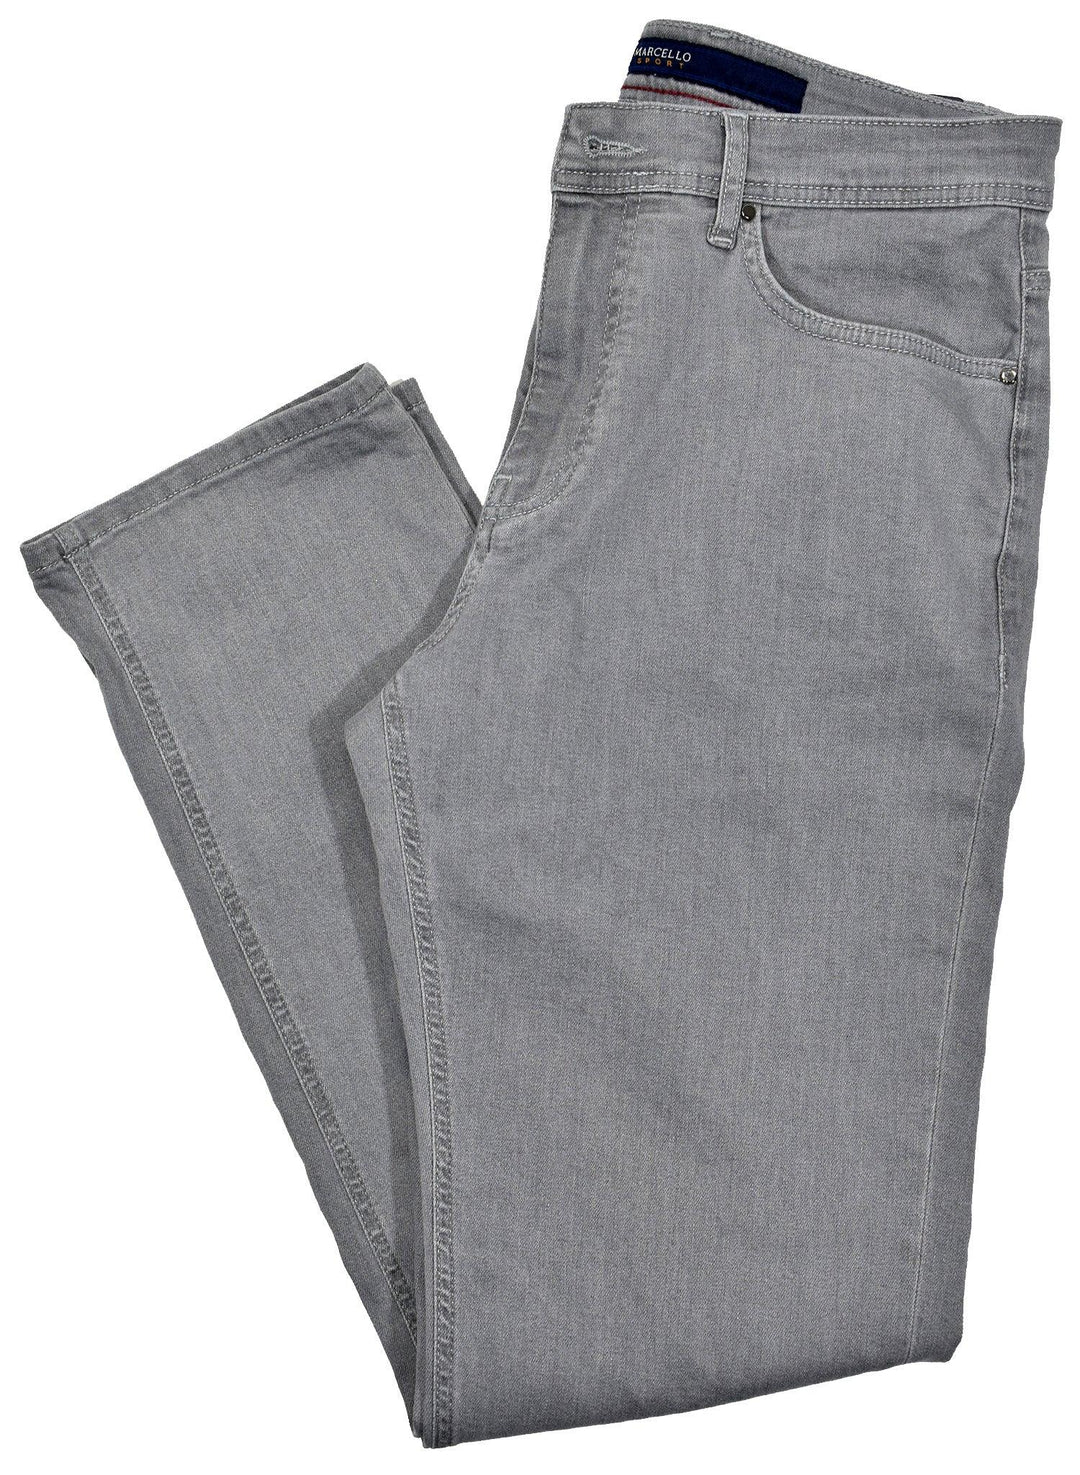 Marcello Sport Mens Grey Denim Jeans  Lightweight and soft denim with a little stretch. Slight texture to jean, minimal grain or wash effect. Classic fit with a slightly tapered leg for an updated look. Medium rise. Enhanced stitching and fashion lining. All 33 length.